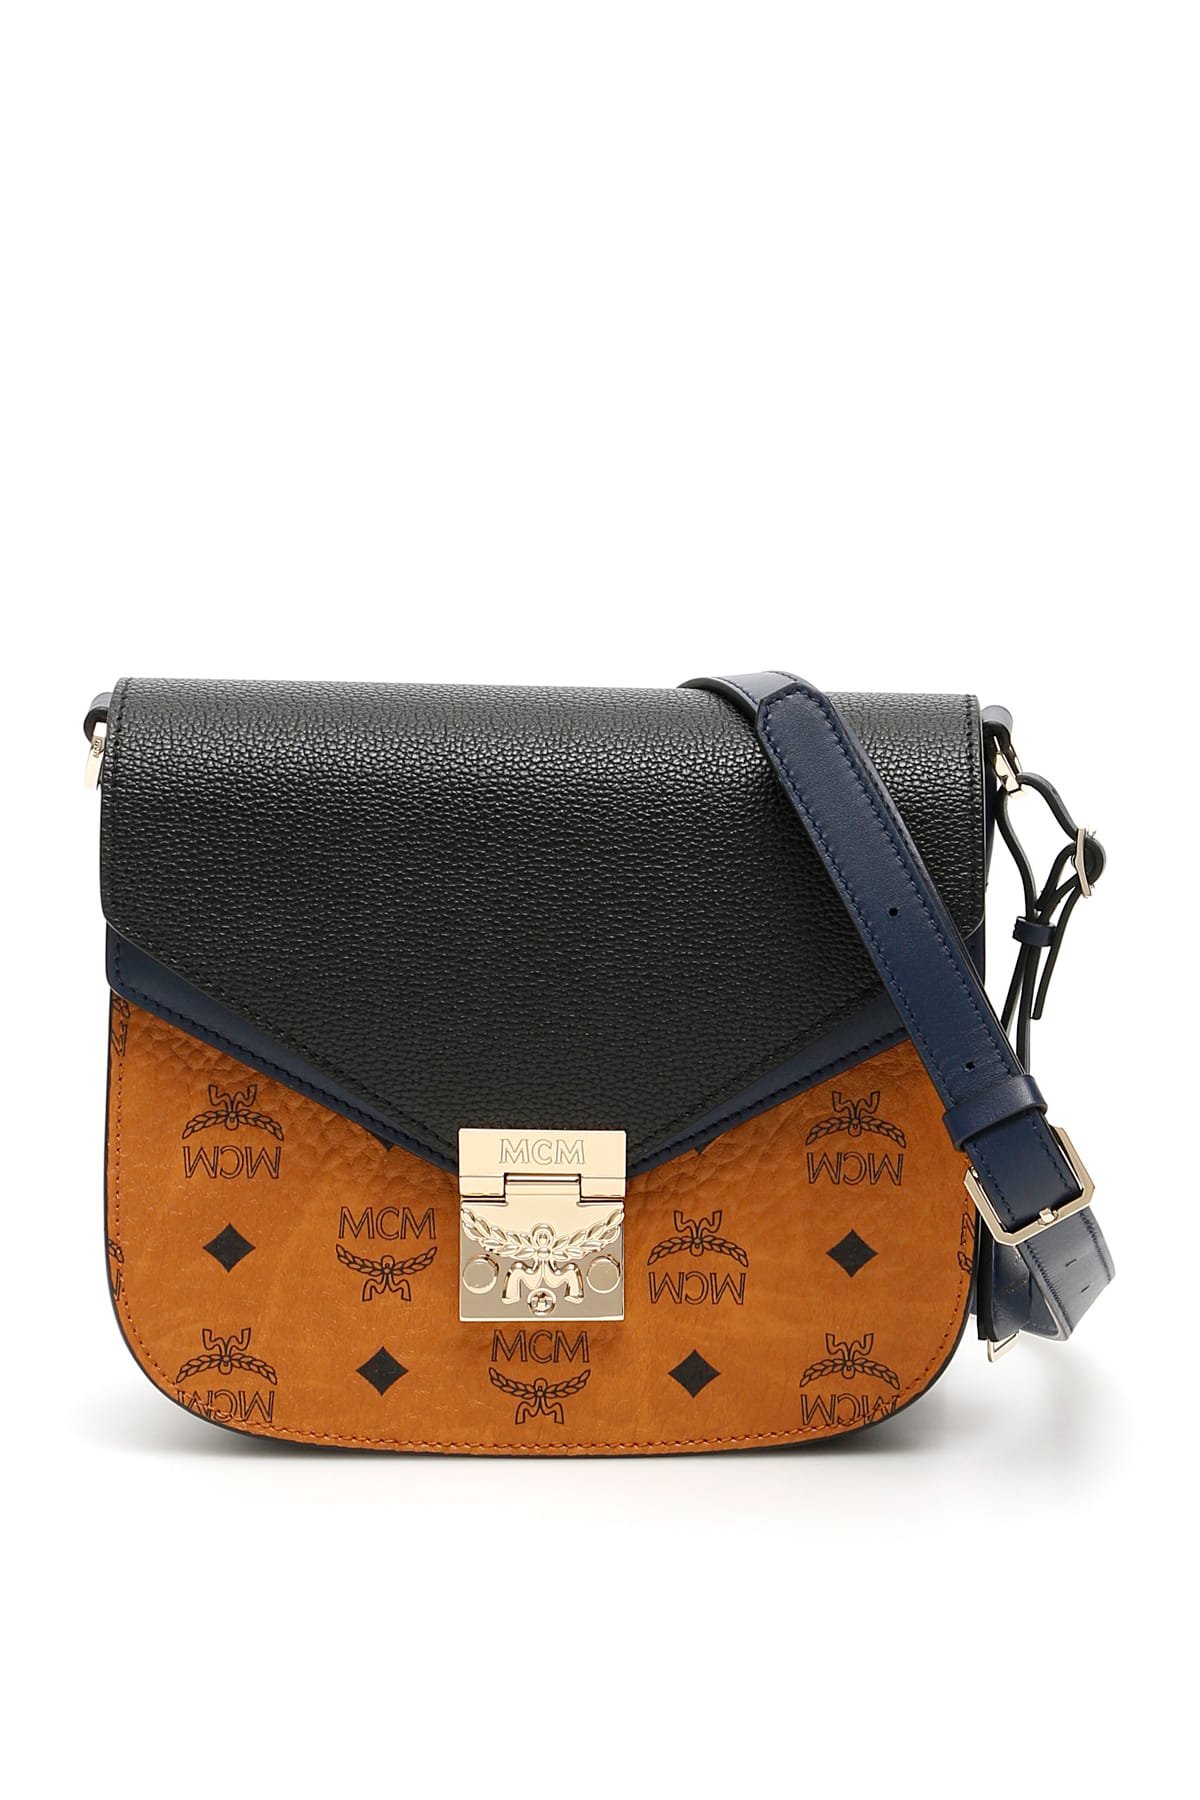 MCM, Bags, Mcm Navy Blue Leather Small Patricia Crossbody Bag